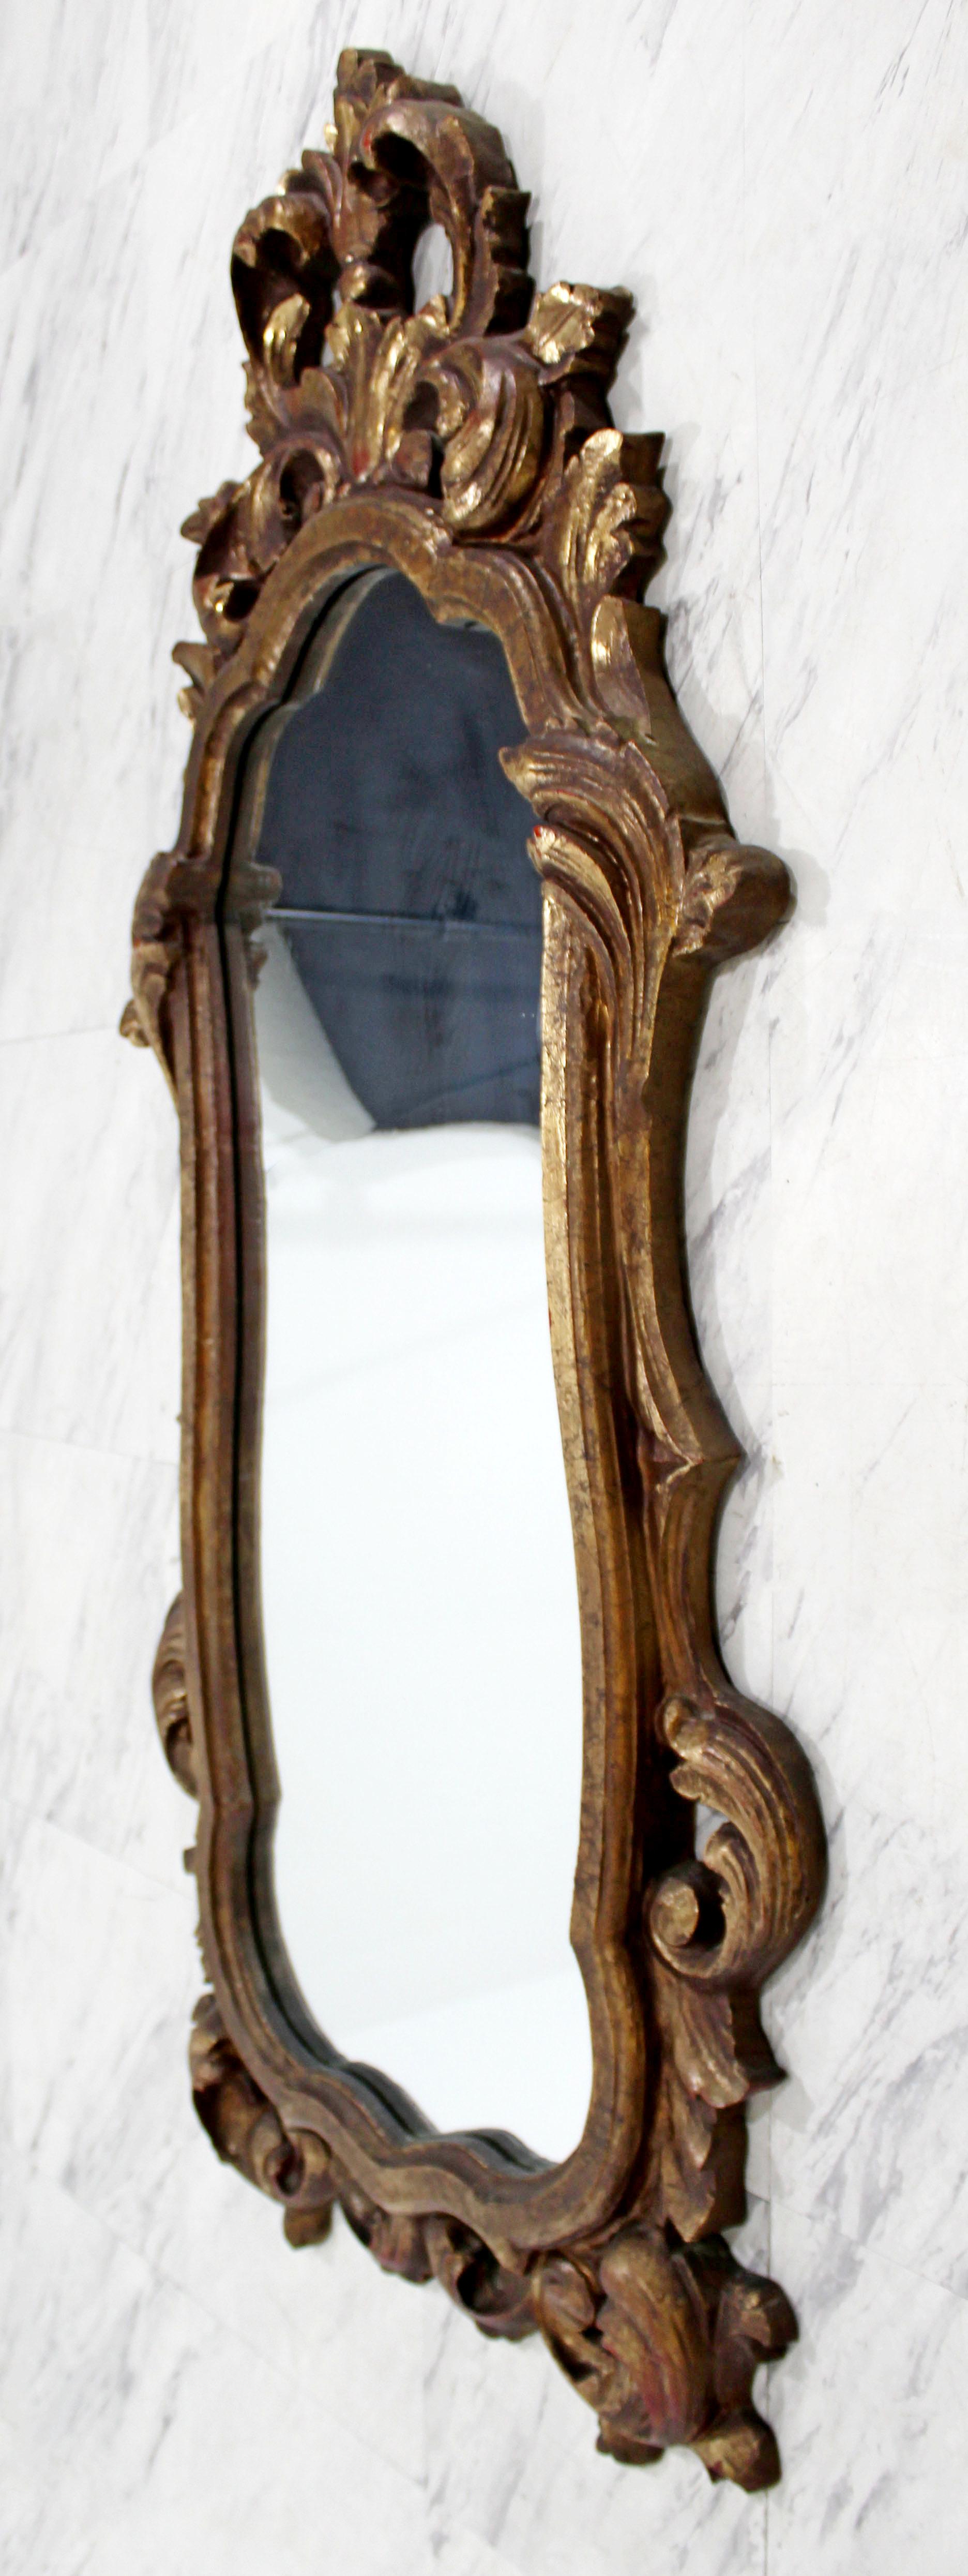 For your consideration is a wonderful pair of gold gilt leaf painted wood, hanging wall mirror. In excellent condition. The dimensions are 22